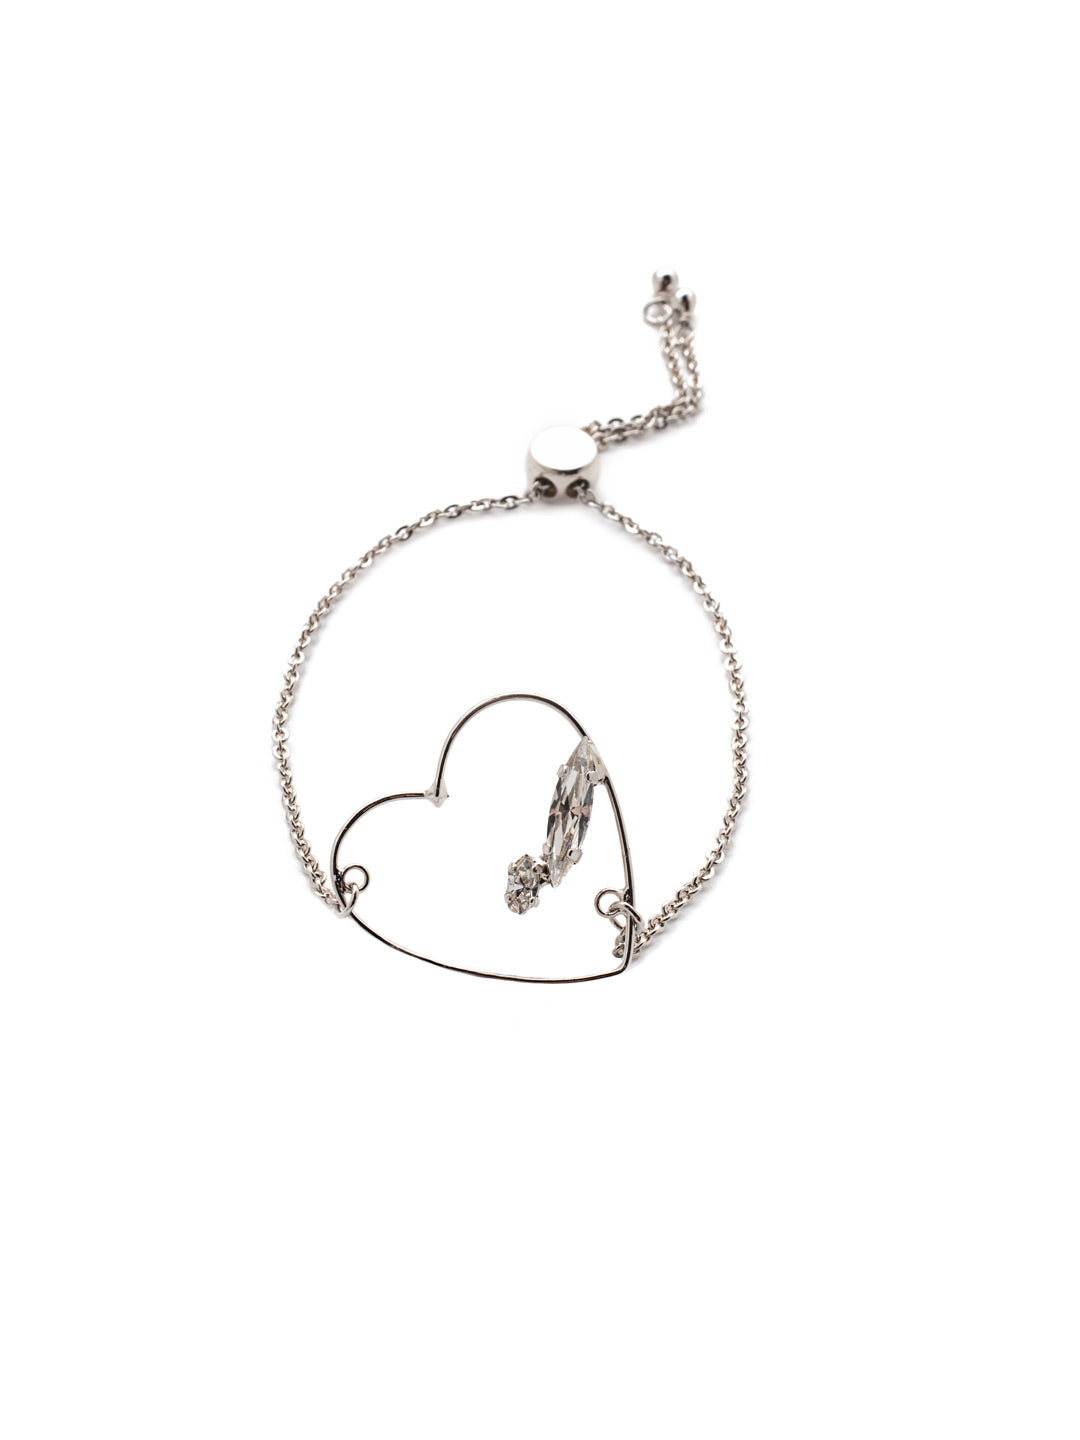 Love Slider Bracelet - BER1PDCRY - <p>Slip on the Love Slider Bracelet and look out. Everyone who loves love will want one of their own. The open-air metal heart shines bright with an affixed navette and oval sparkling crystal. From Sorrelli's Crystal collection in our Palladium finish.</p>